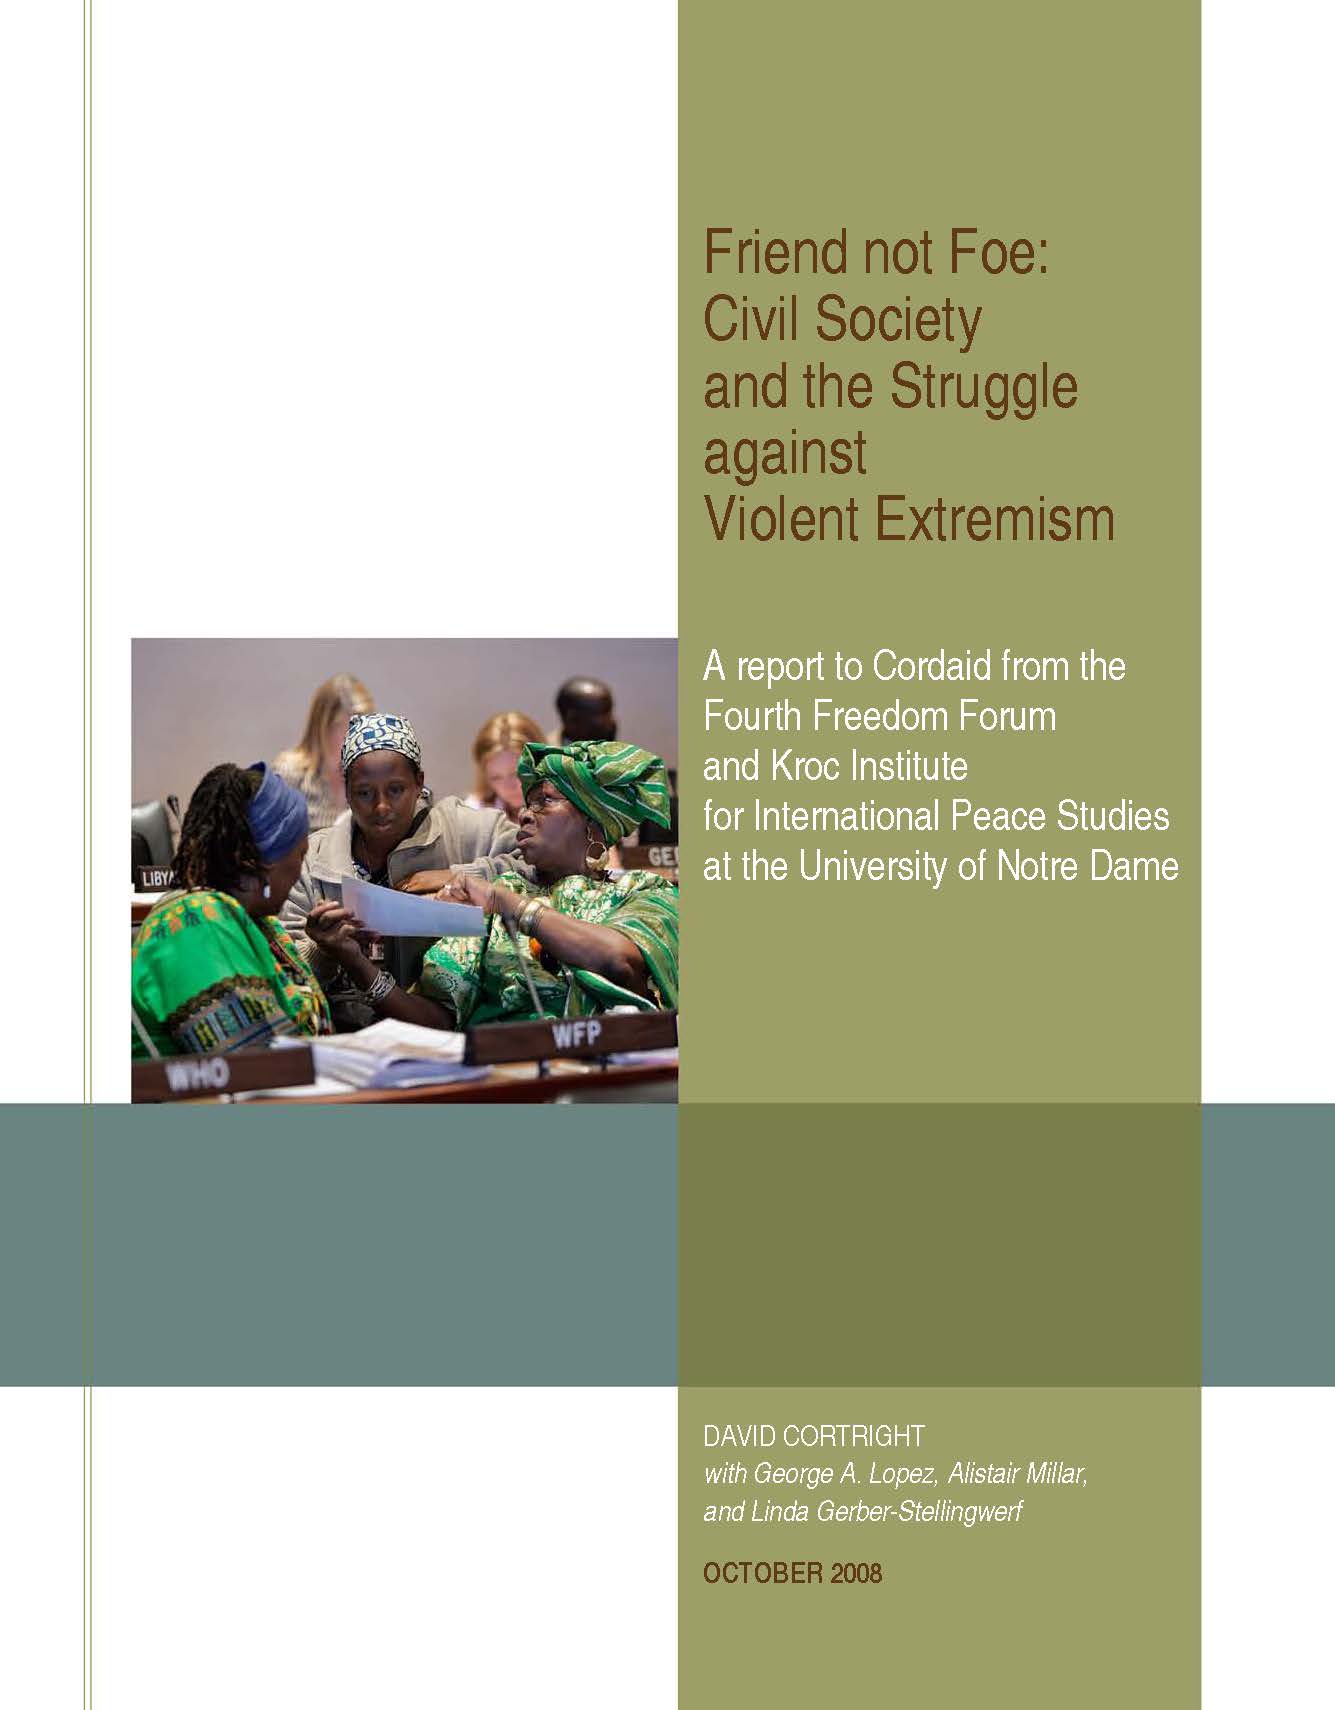 Friend not Foe: Civil Society and the Struggle against Violent Extremism